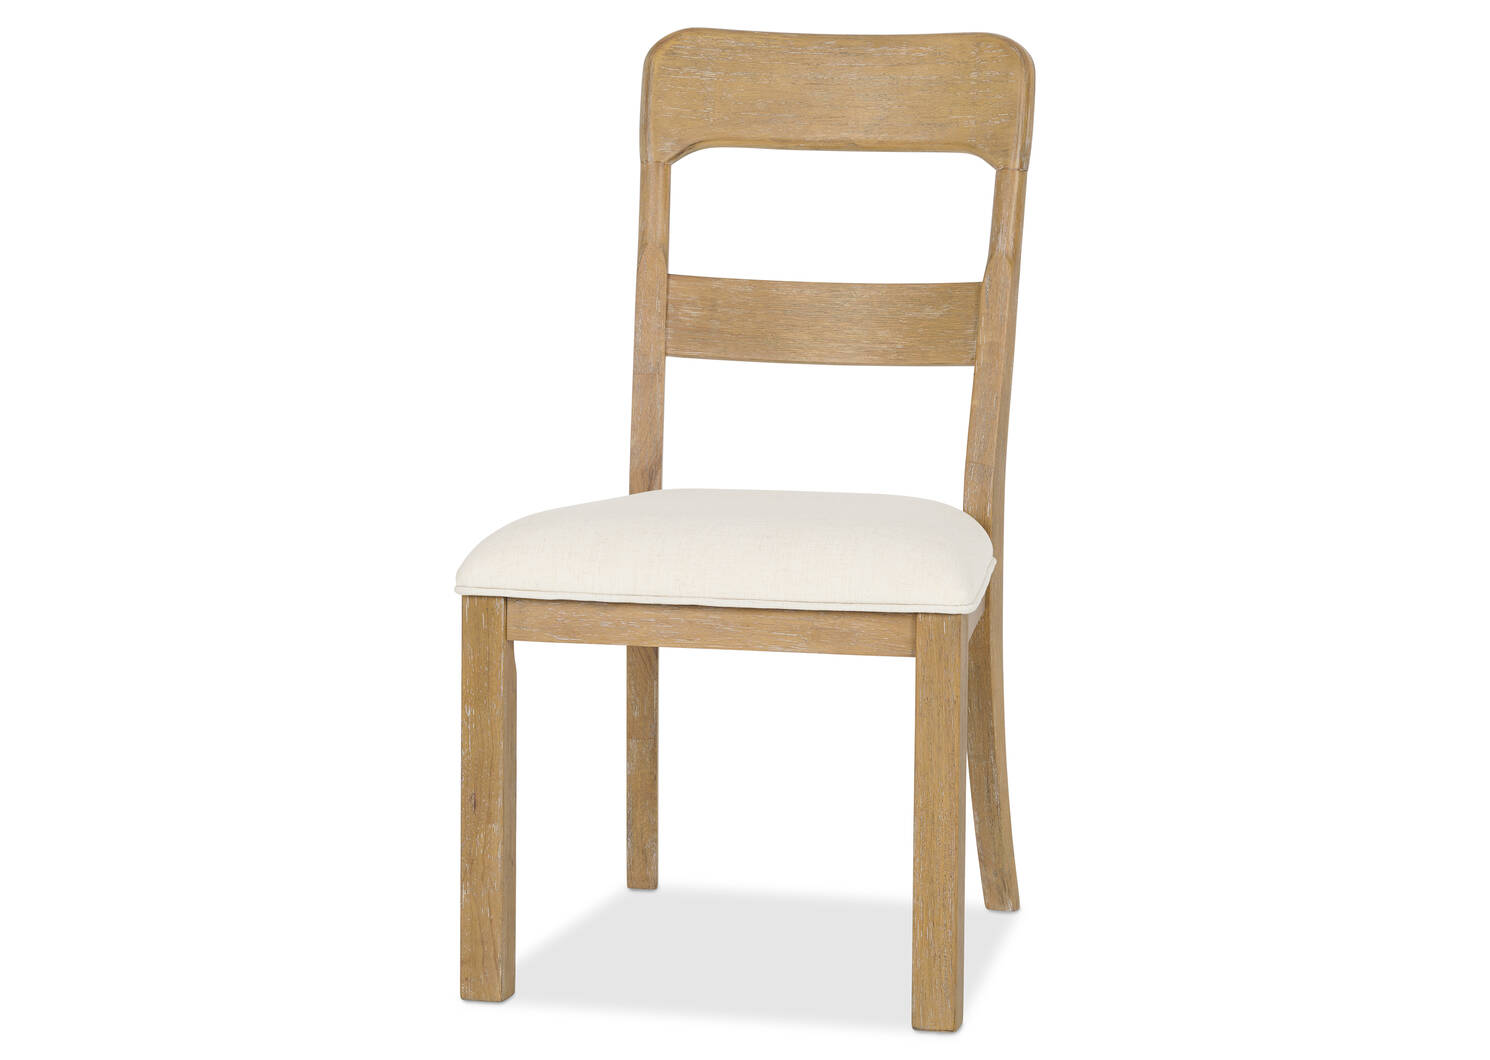 Pinehurst Dining Chair -Claire Fawn